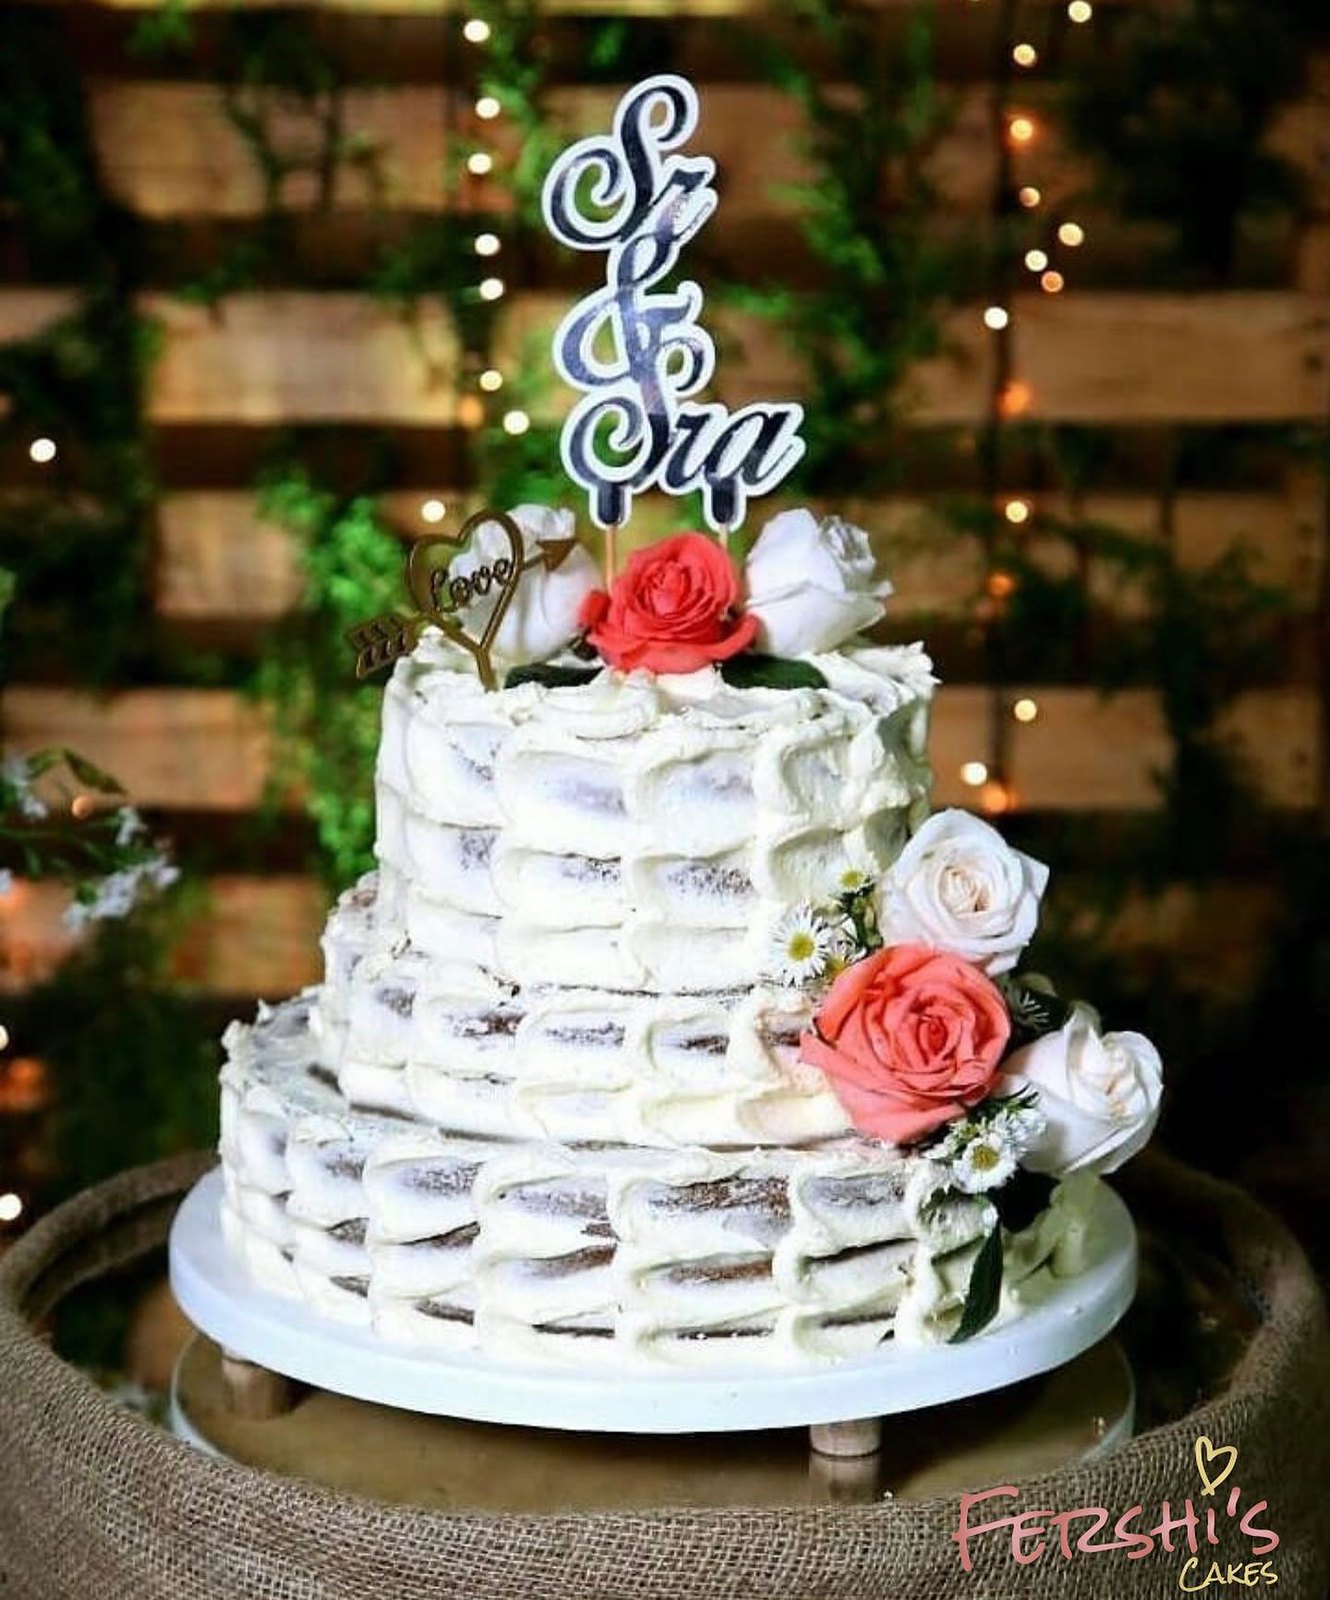 Cake by Fershi’s Cakes & Pastry